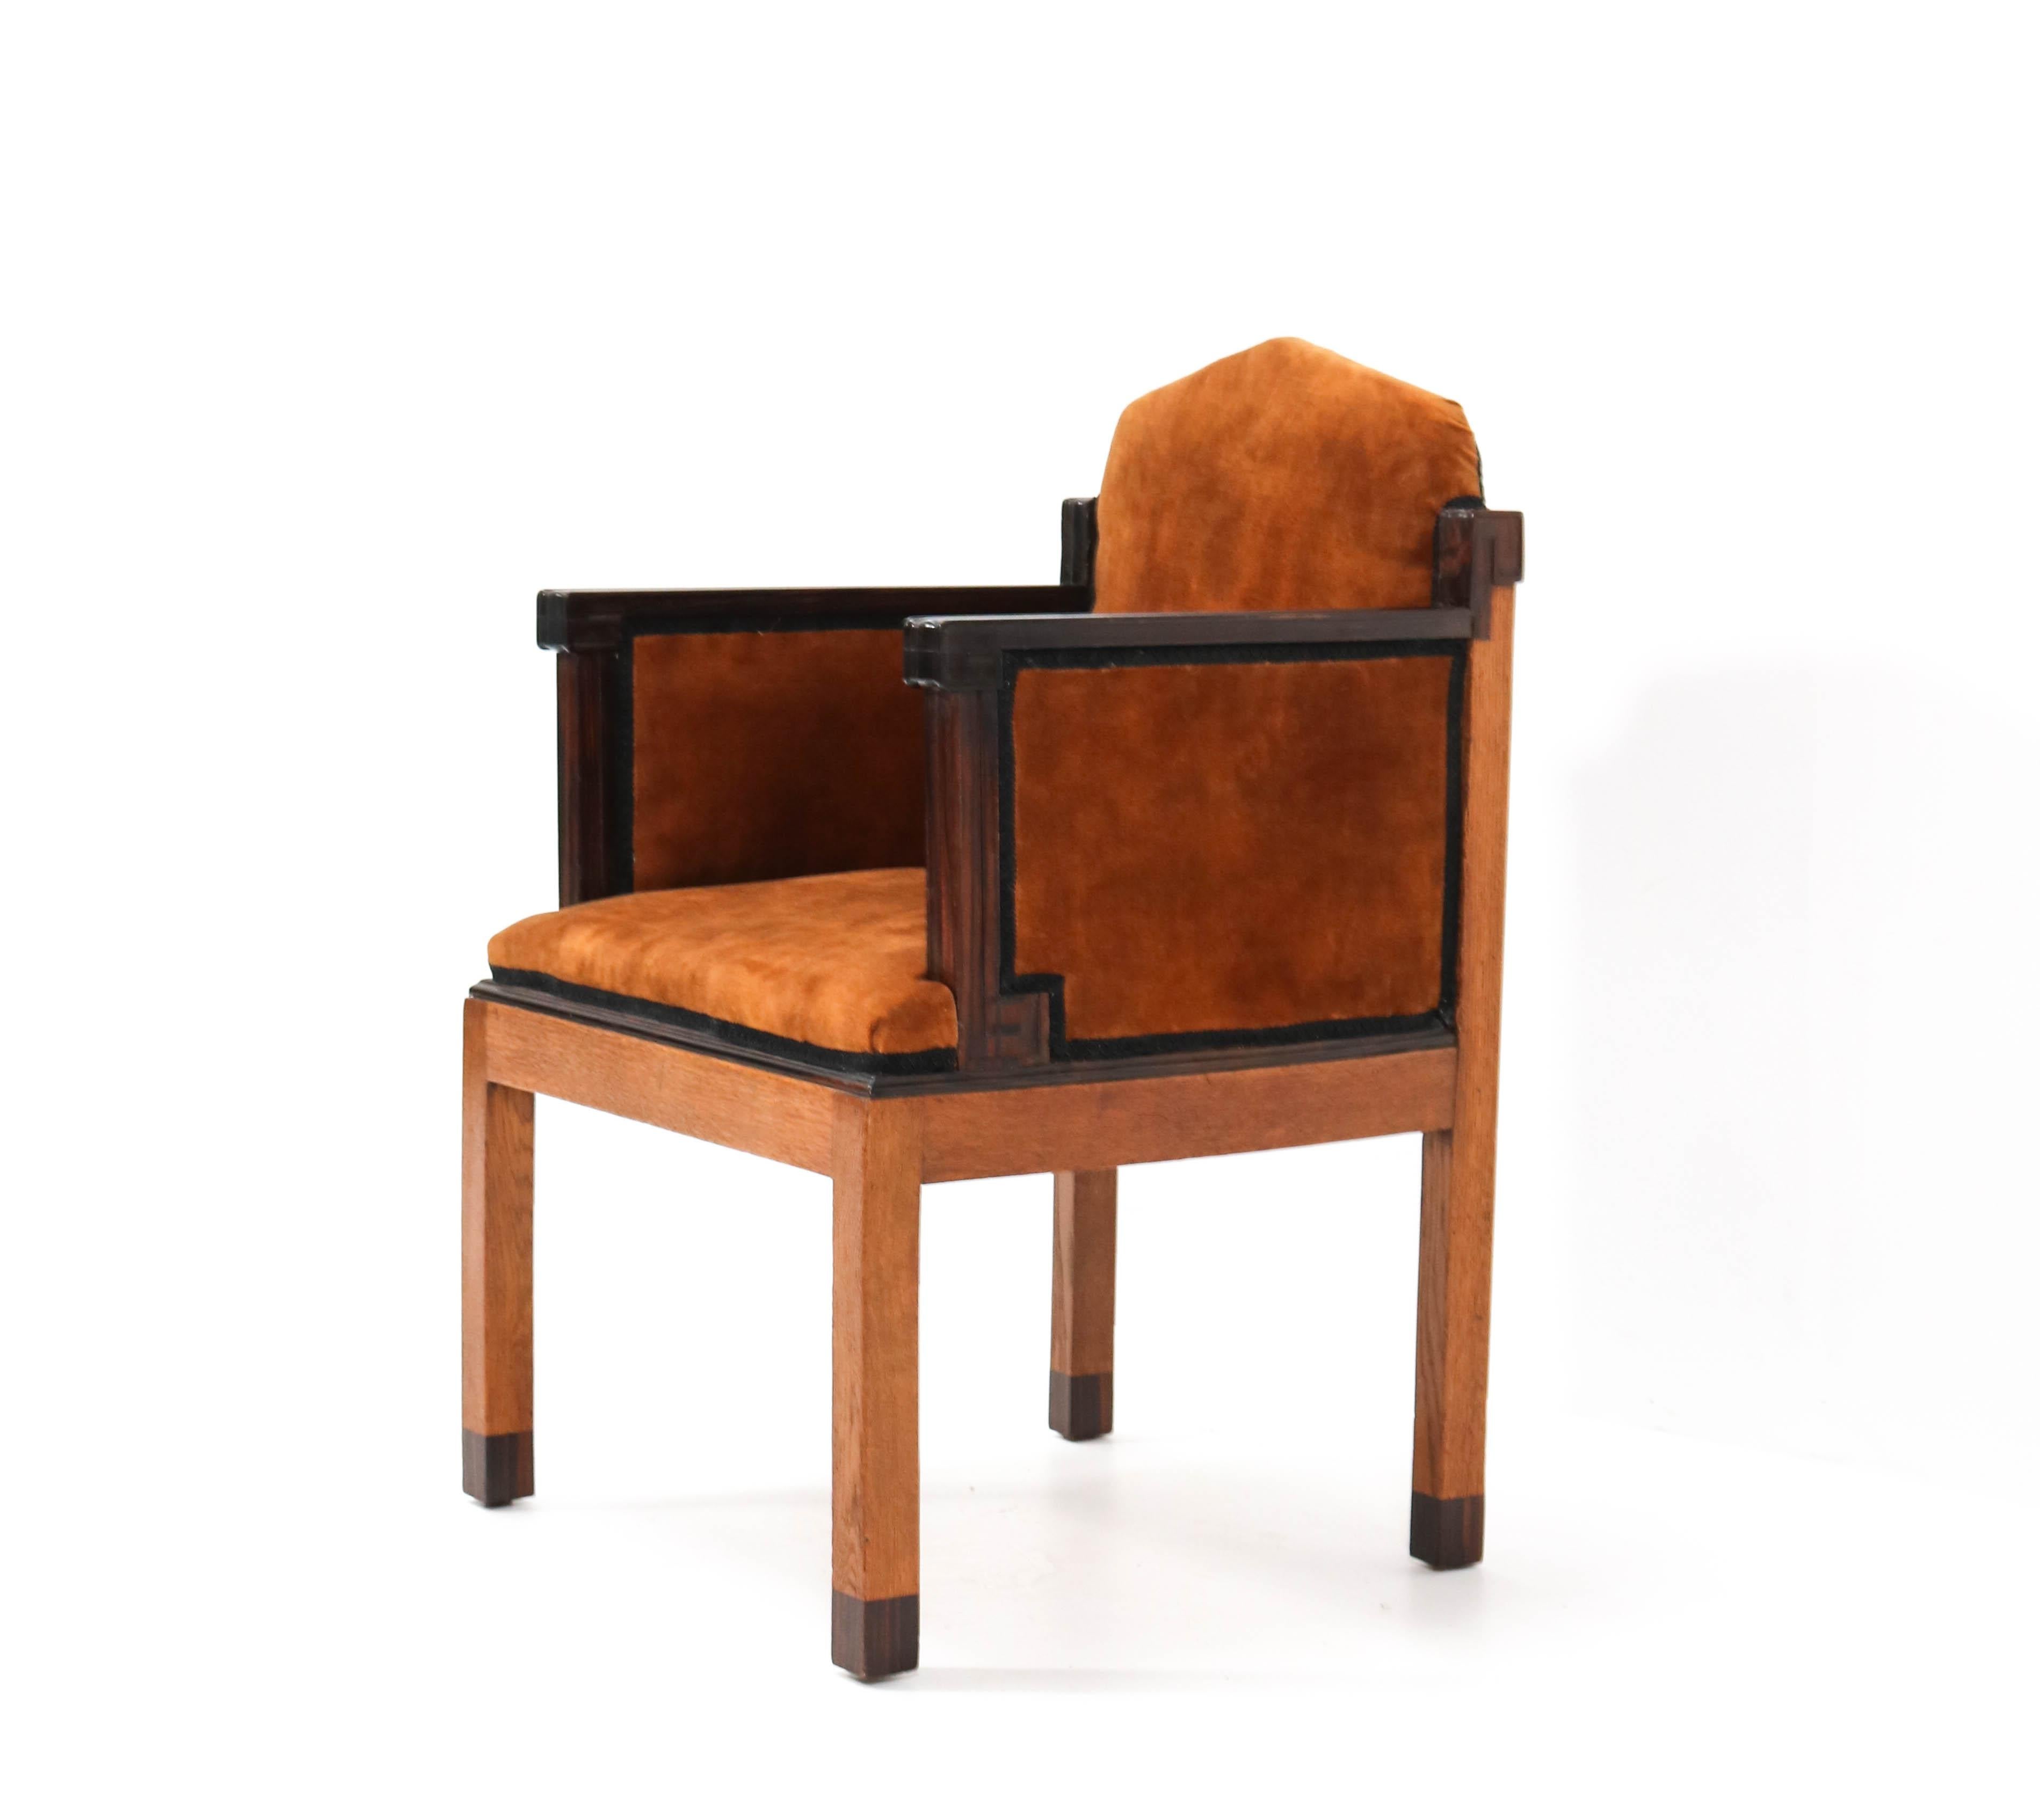 Stunning and very rare Art Deco Amsterdamse School armchair.
Design by Fa. Drilling Amsterdam.
Striking Dutch design from the 1920s.
Solid oak with solid macassar ebony armrests.
Re-upholstered with velvet fabric.
In good original condition